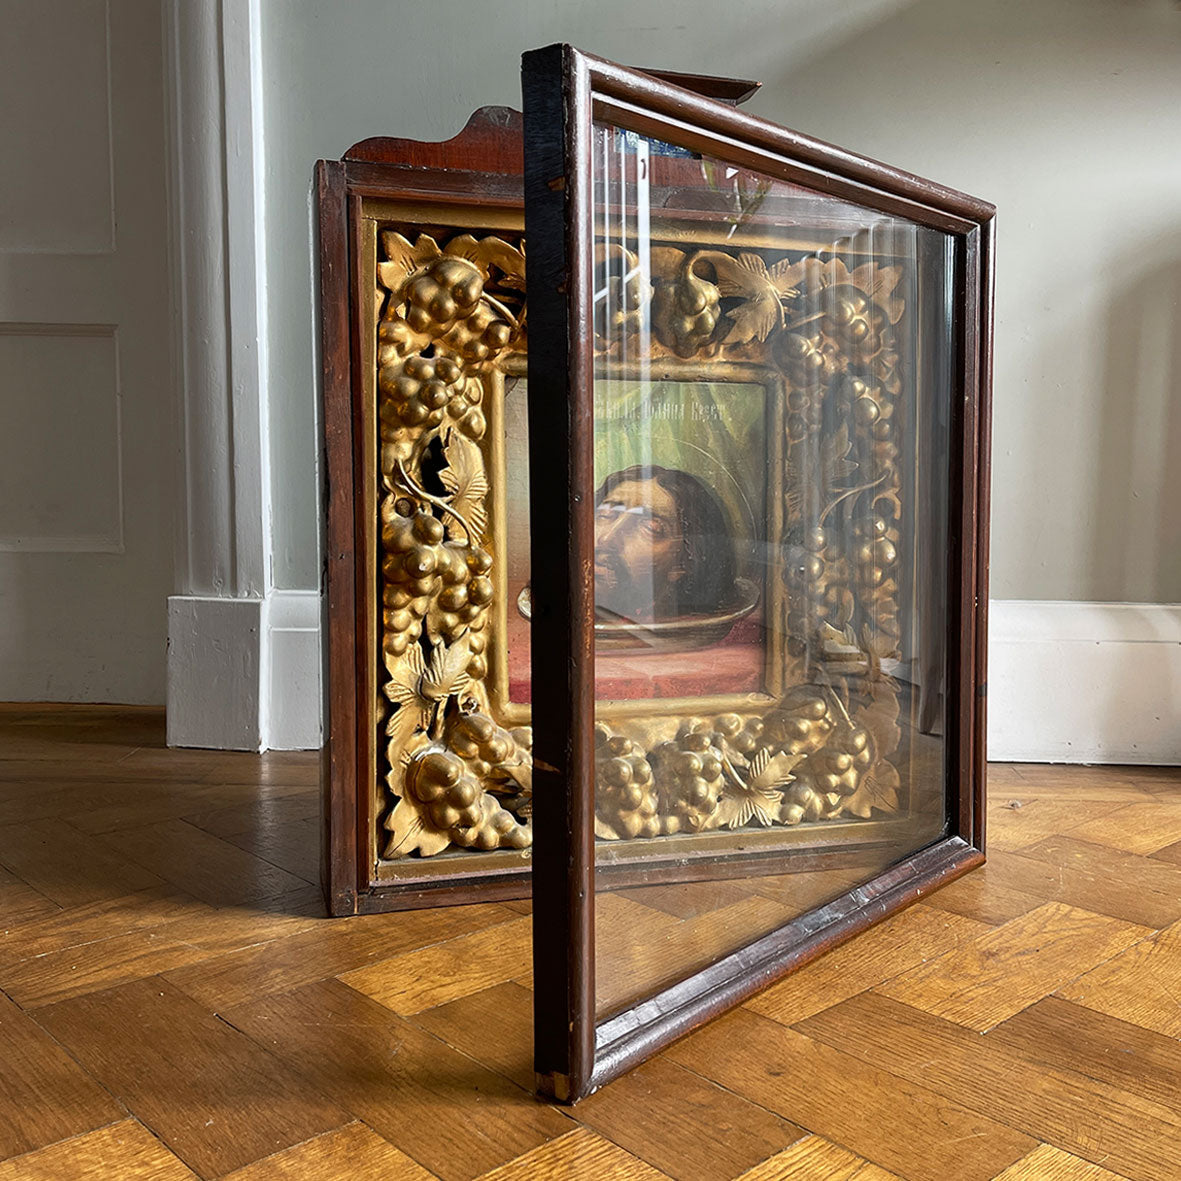 An impressive Russian Church Art Piece of John the Baptist from the Victorian period. The well executed painting is framed in a plaster gilt frame of vine leaves and grapes, this is in-turn inside a stained pine cabinet fronted in its original glass - SHOP NOW - www.intovintage.co.uk